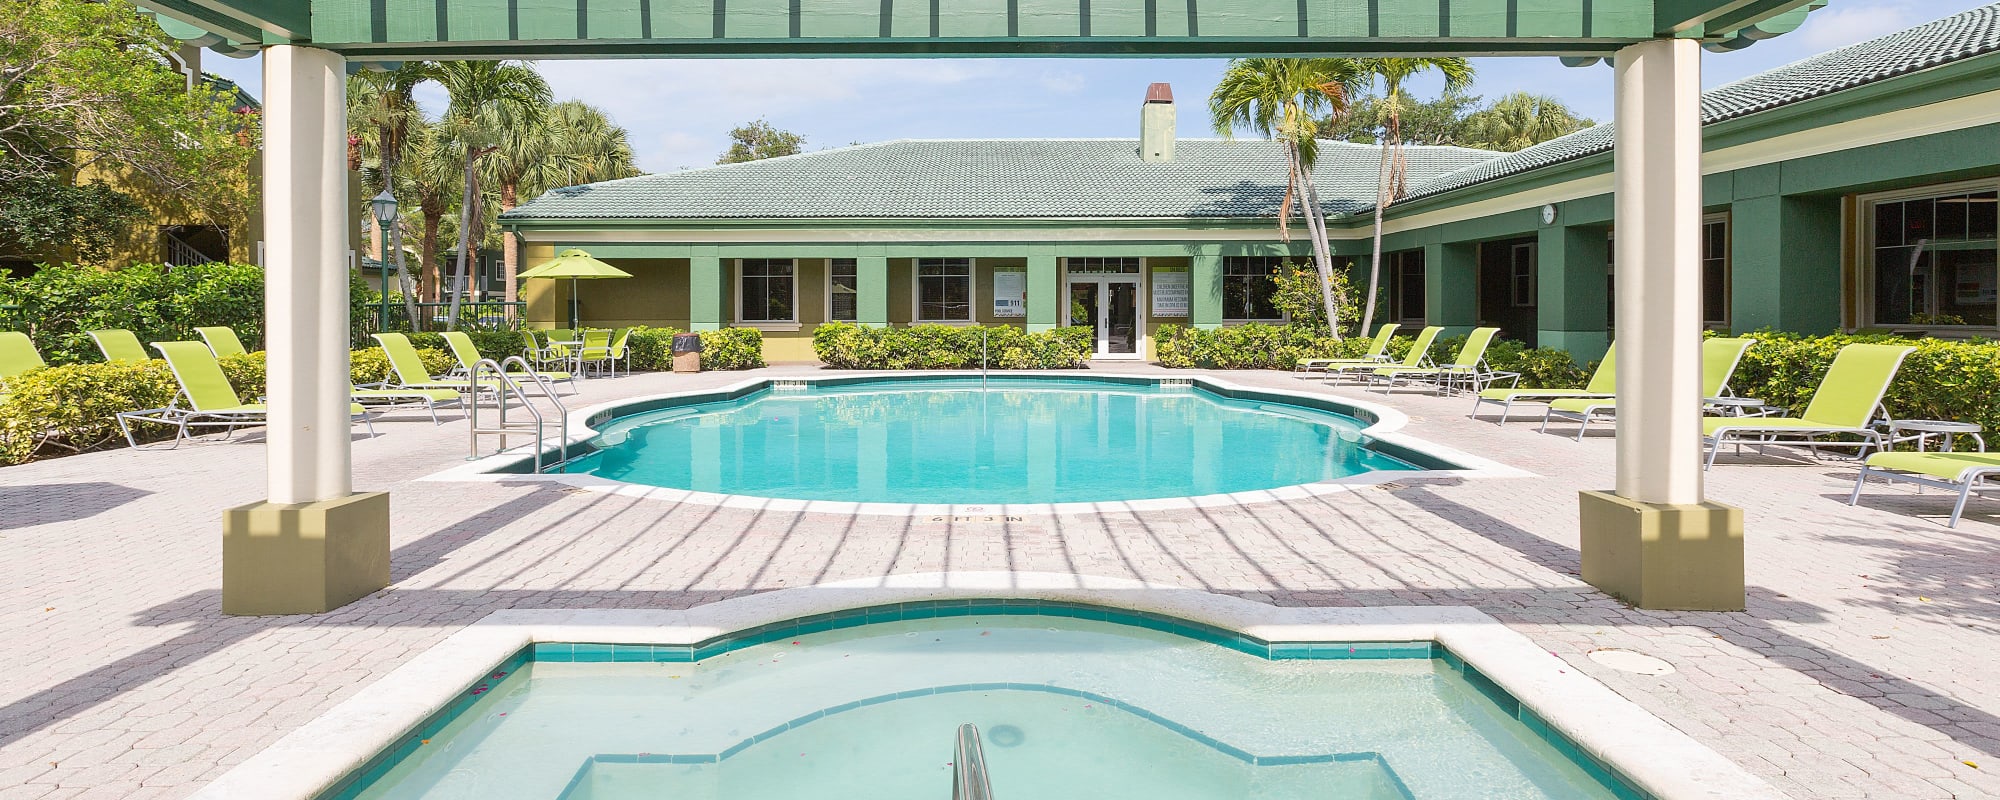 Amenities at Sanctuary Cove Apartments in West Palm Beach, Florida